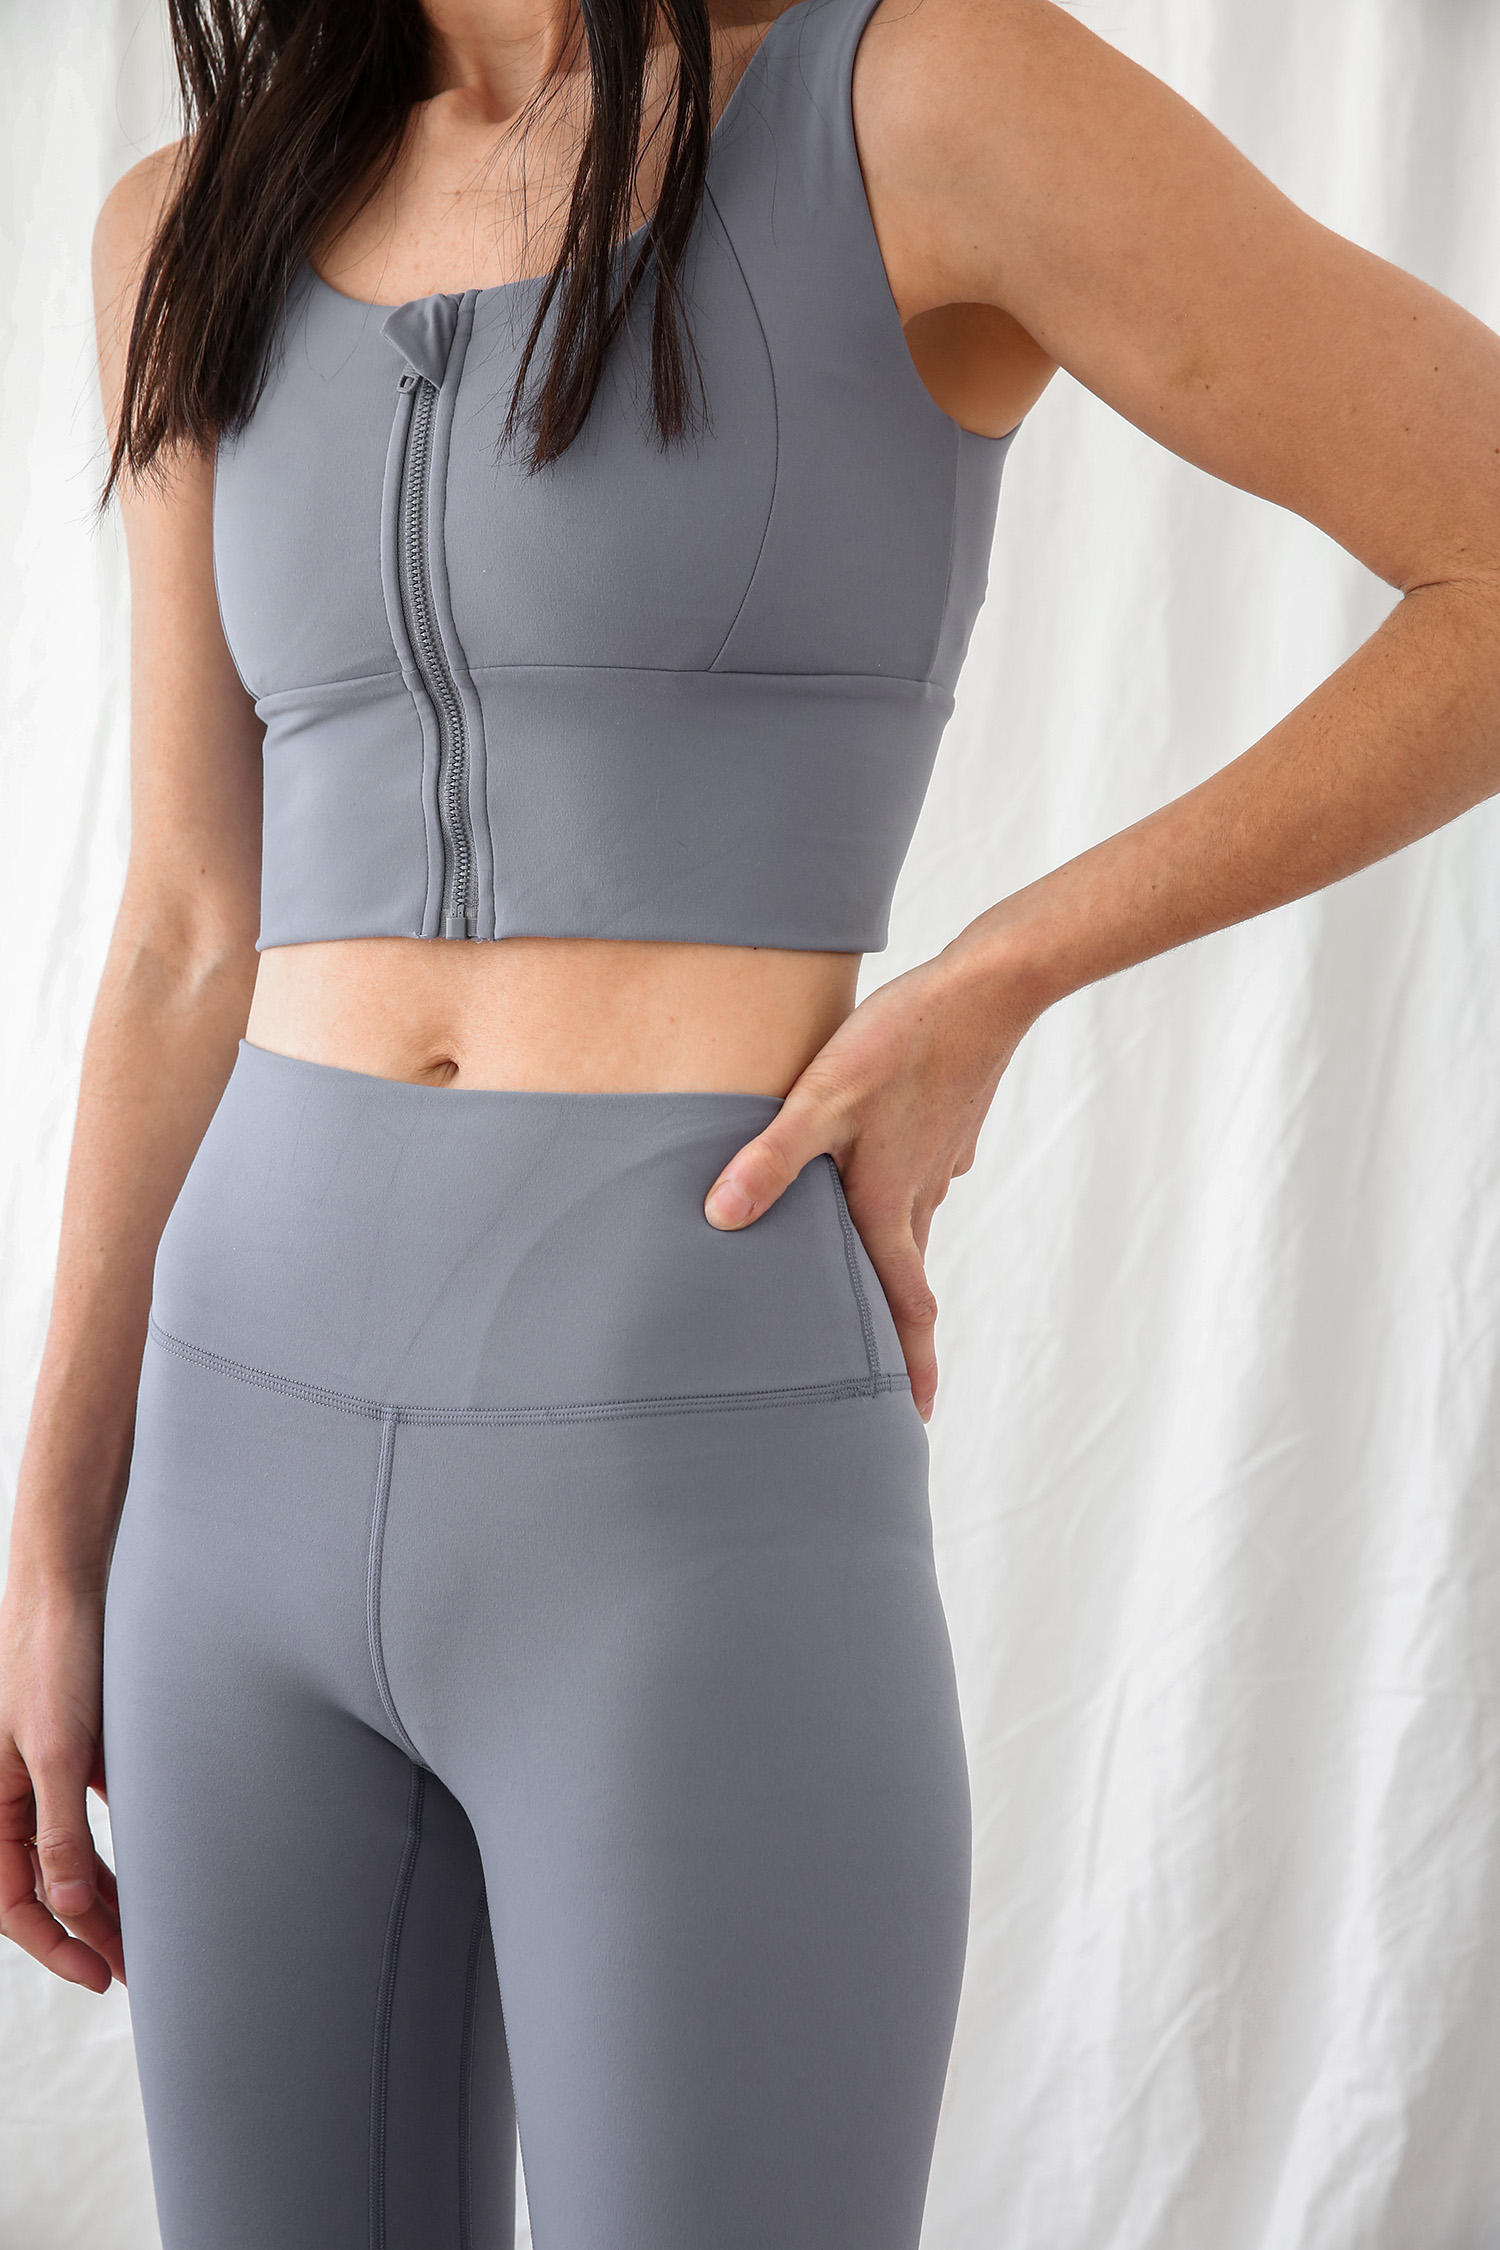 Five activewear sets for post-lockdown workouts - Mademoiselle